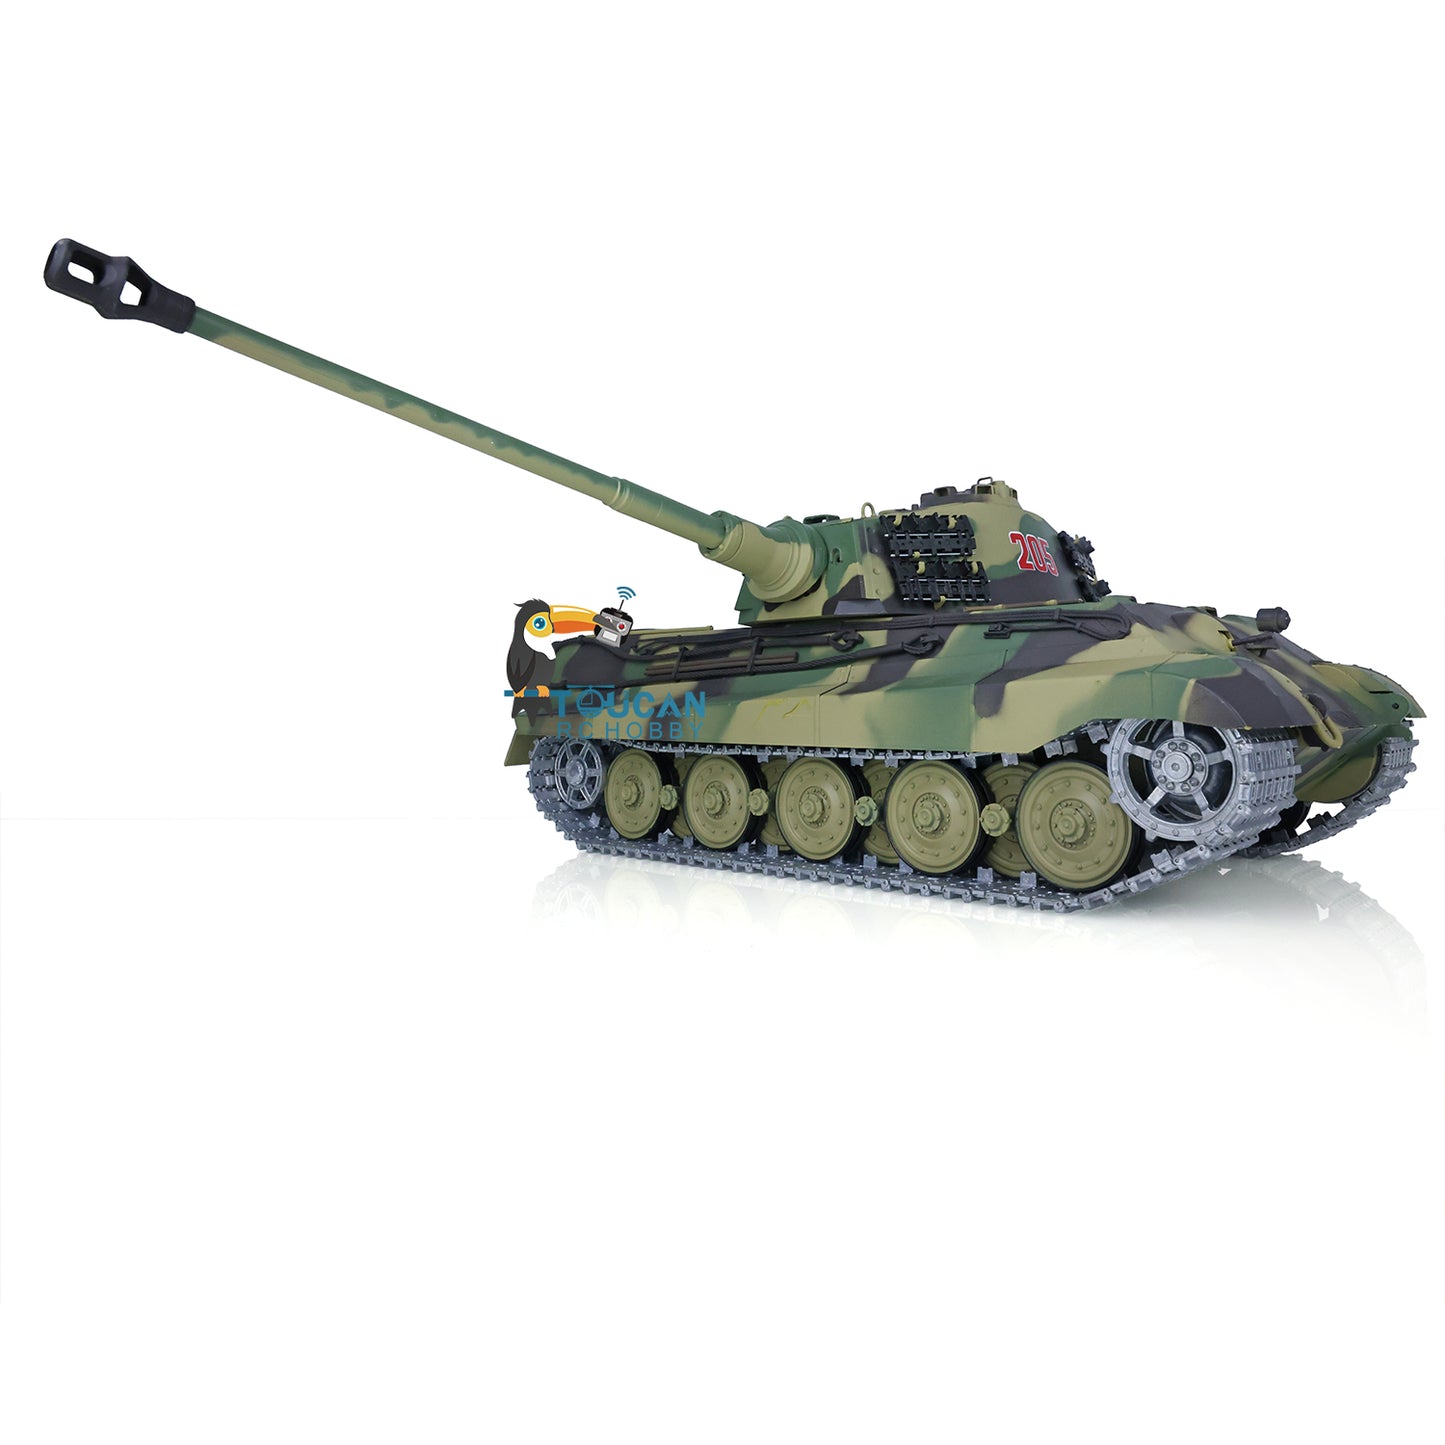 US Stock 2.4Ghz Henglong 1:16 7.0 German King Tiger RTR RC Tank 3888A Model Metal Tracks 340 Degree Turret Steel Driving Gearbox